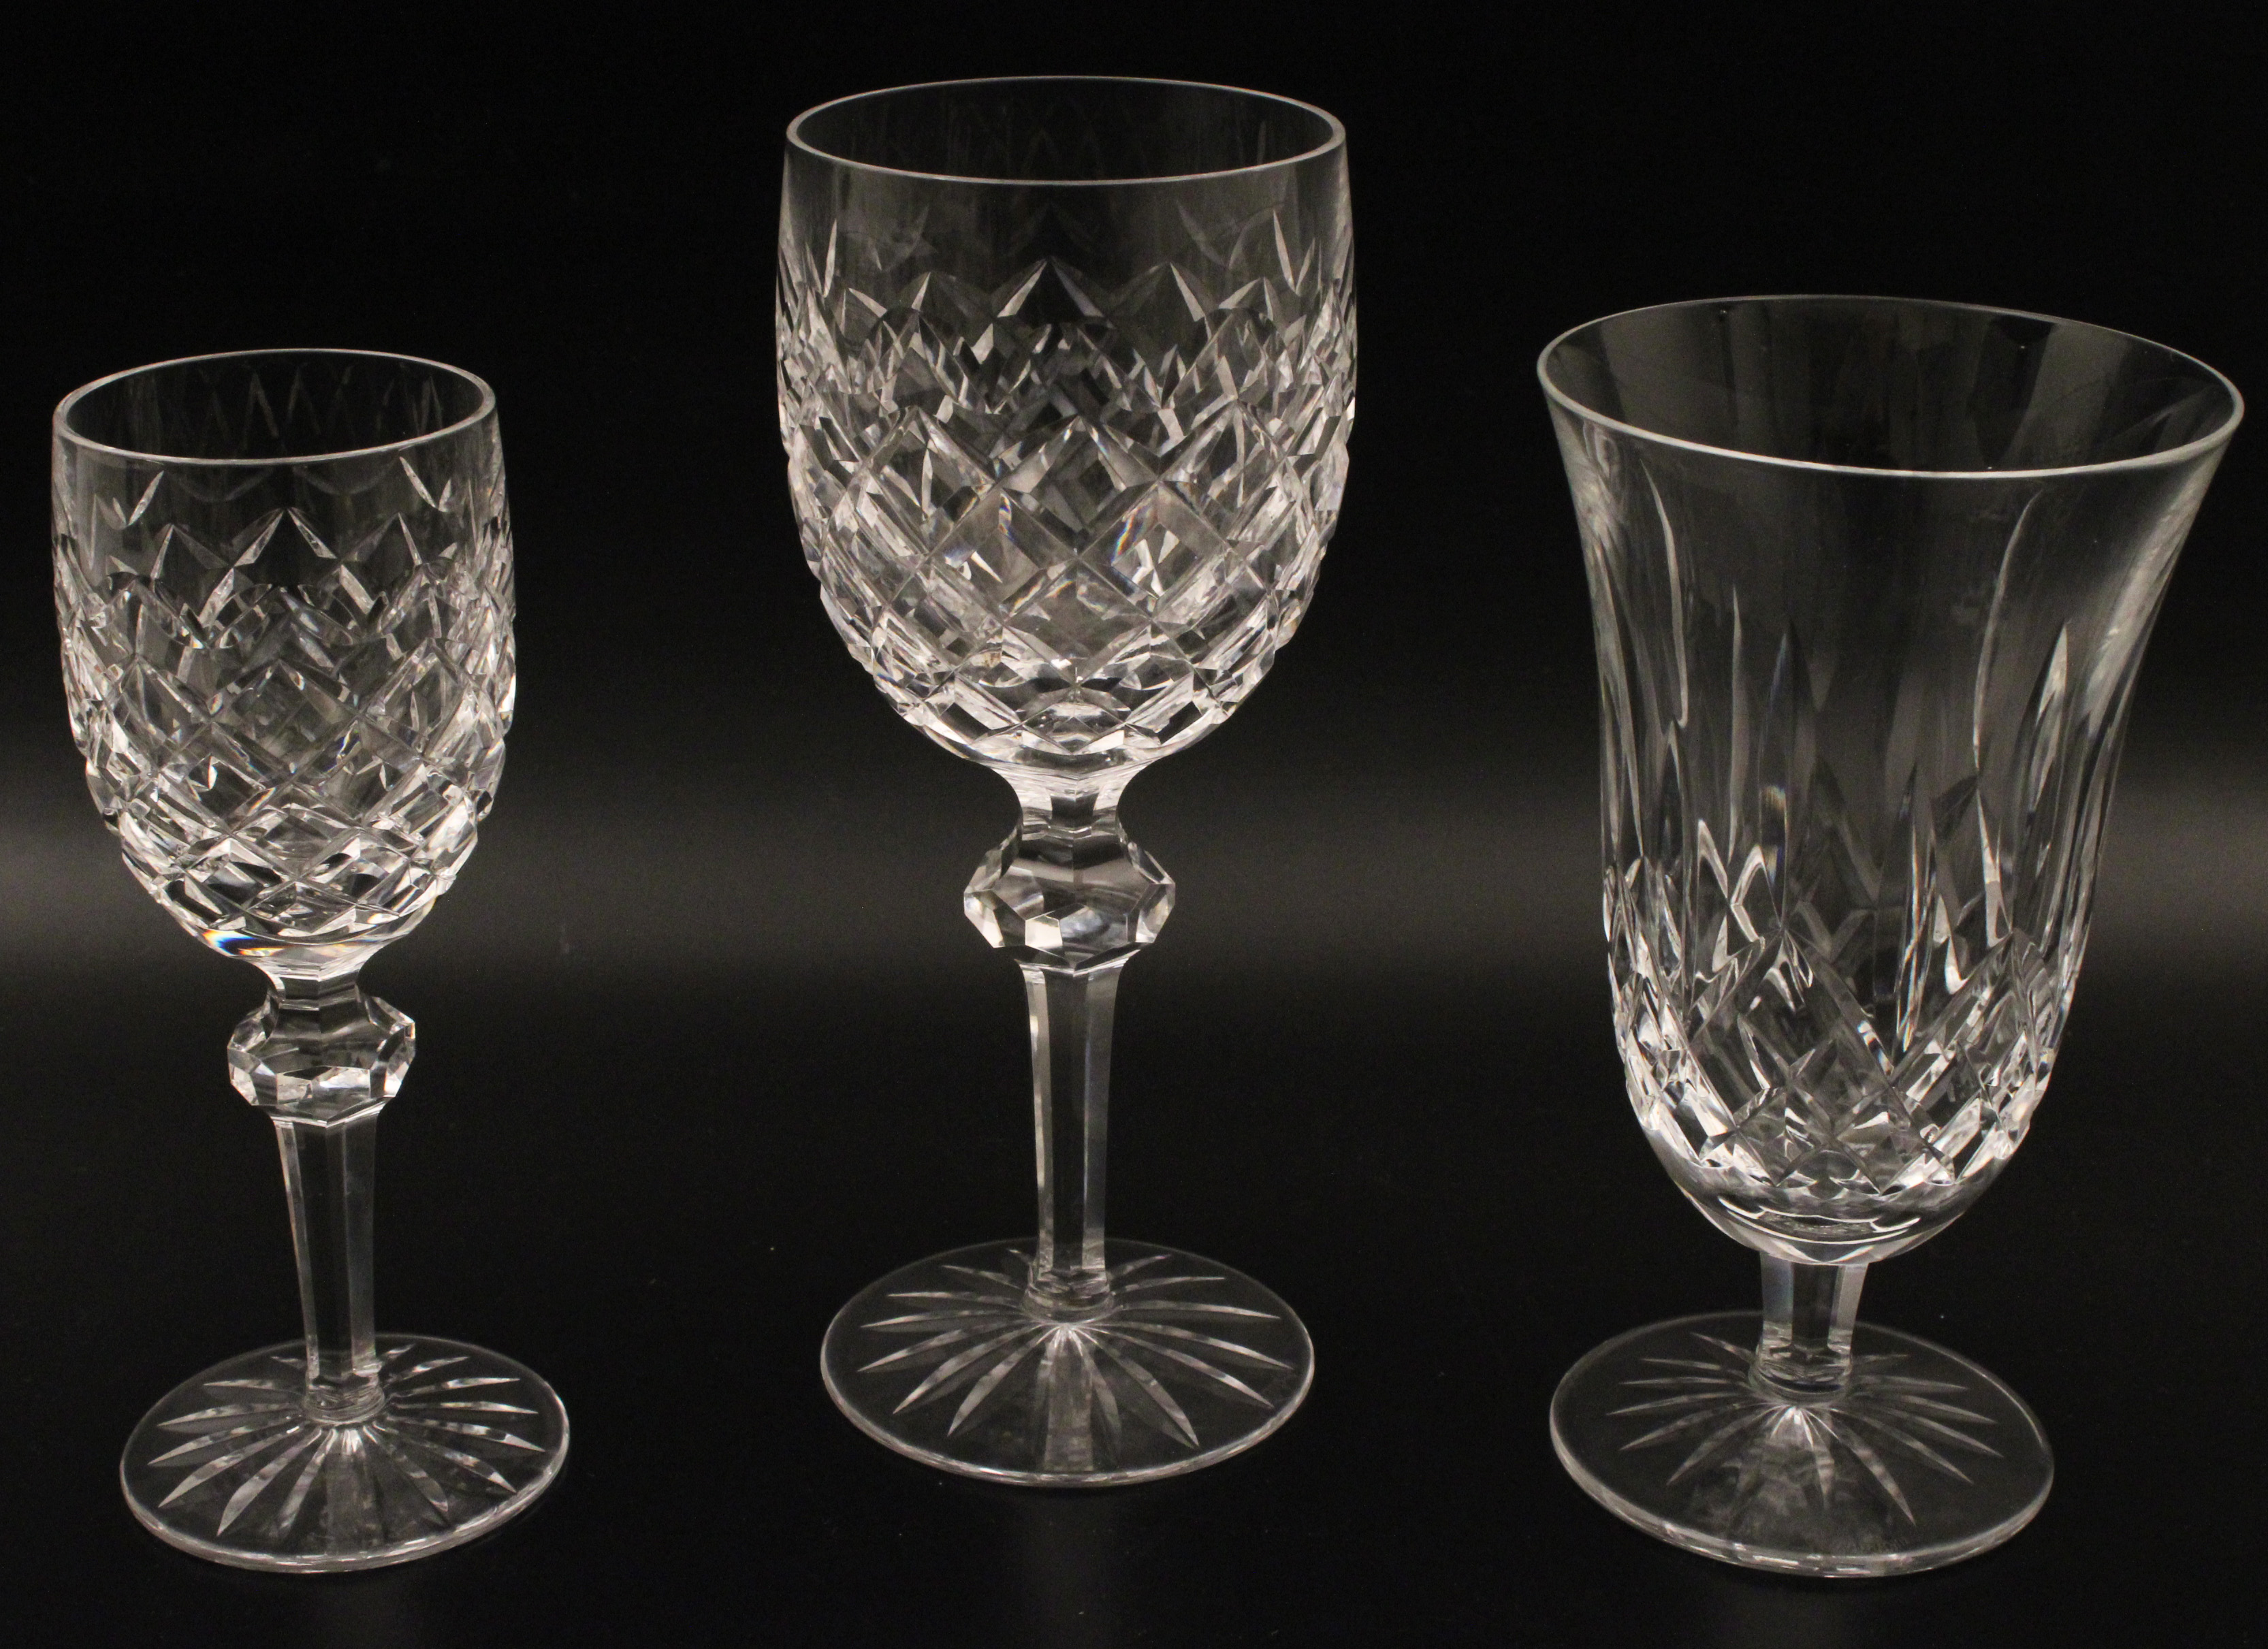 36 PIECES OF WATERFORD CRYSTAL